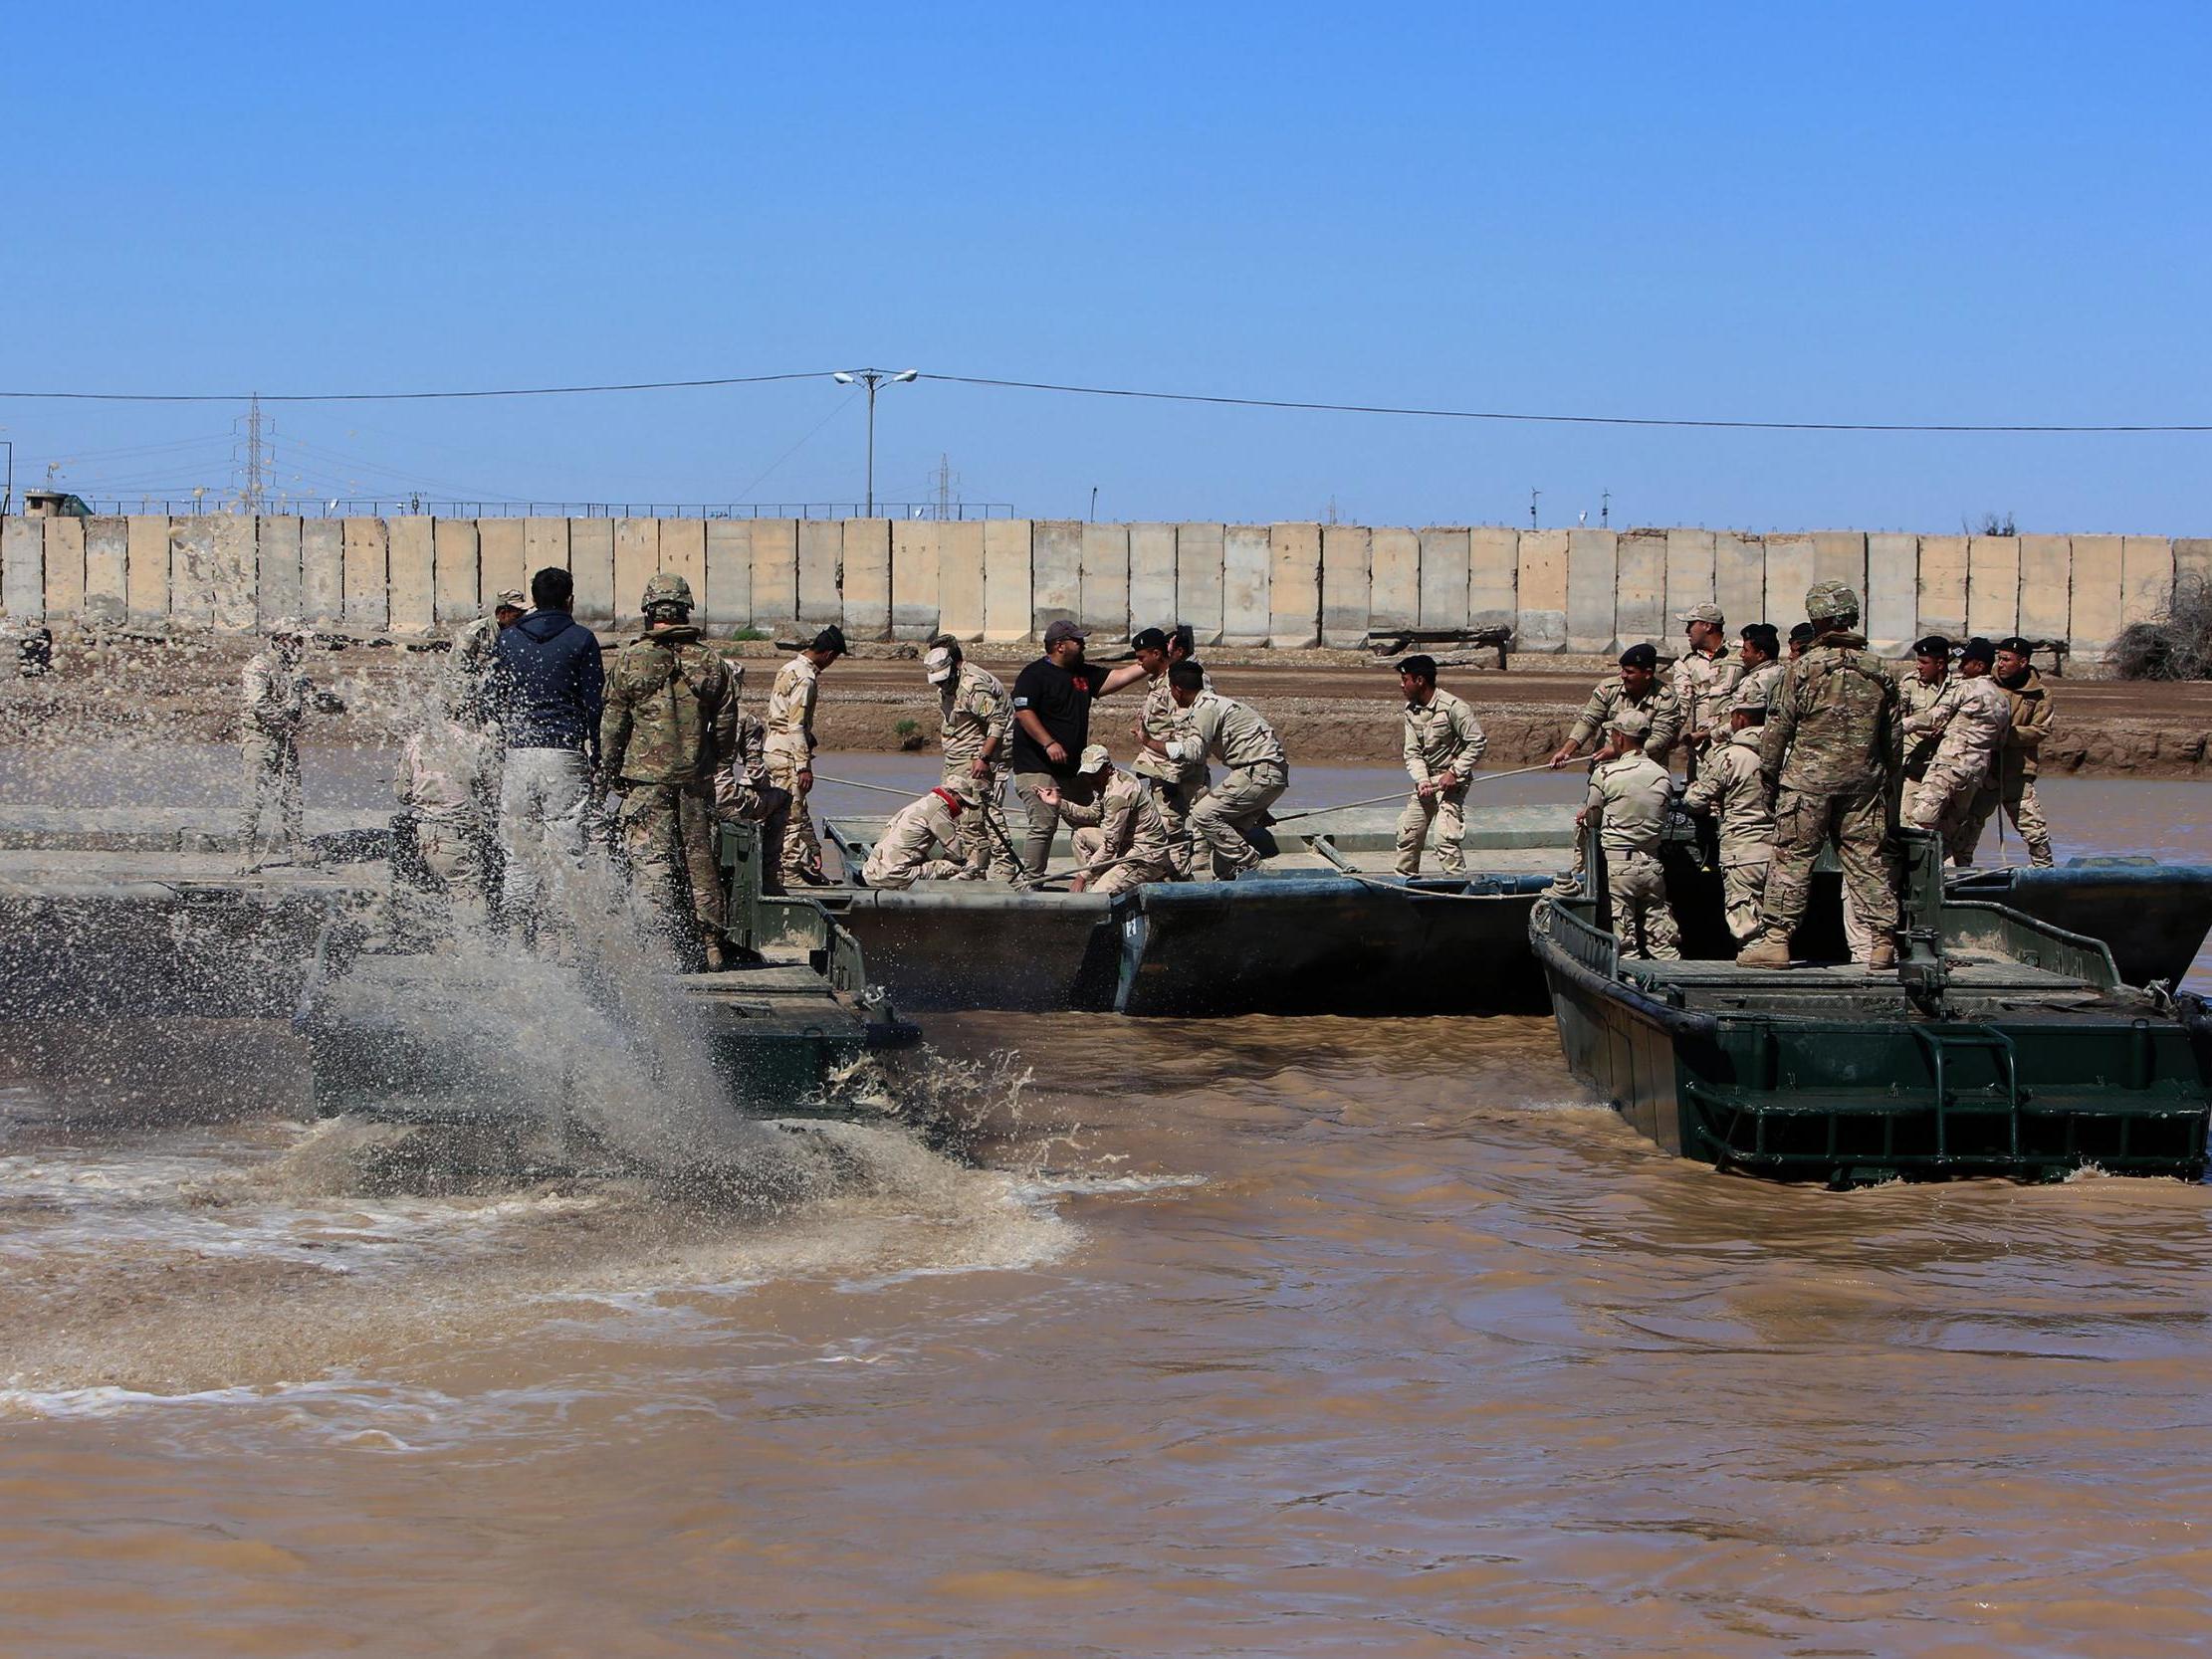 Coalition forces and Iraqi soldiers during a 2017 training session at Camp Taji, where a British medic and two Americans were killed by a rocket attack on 11 March, 2019